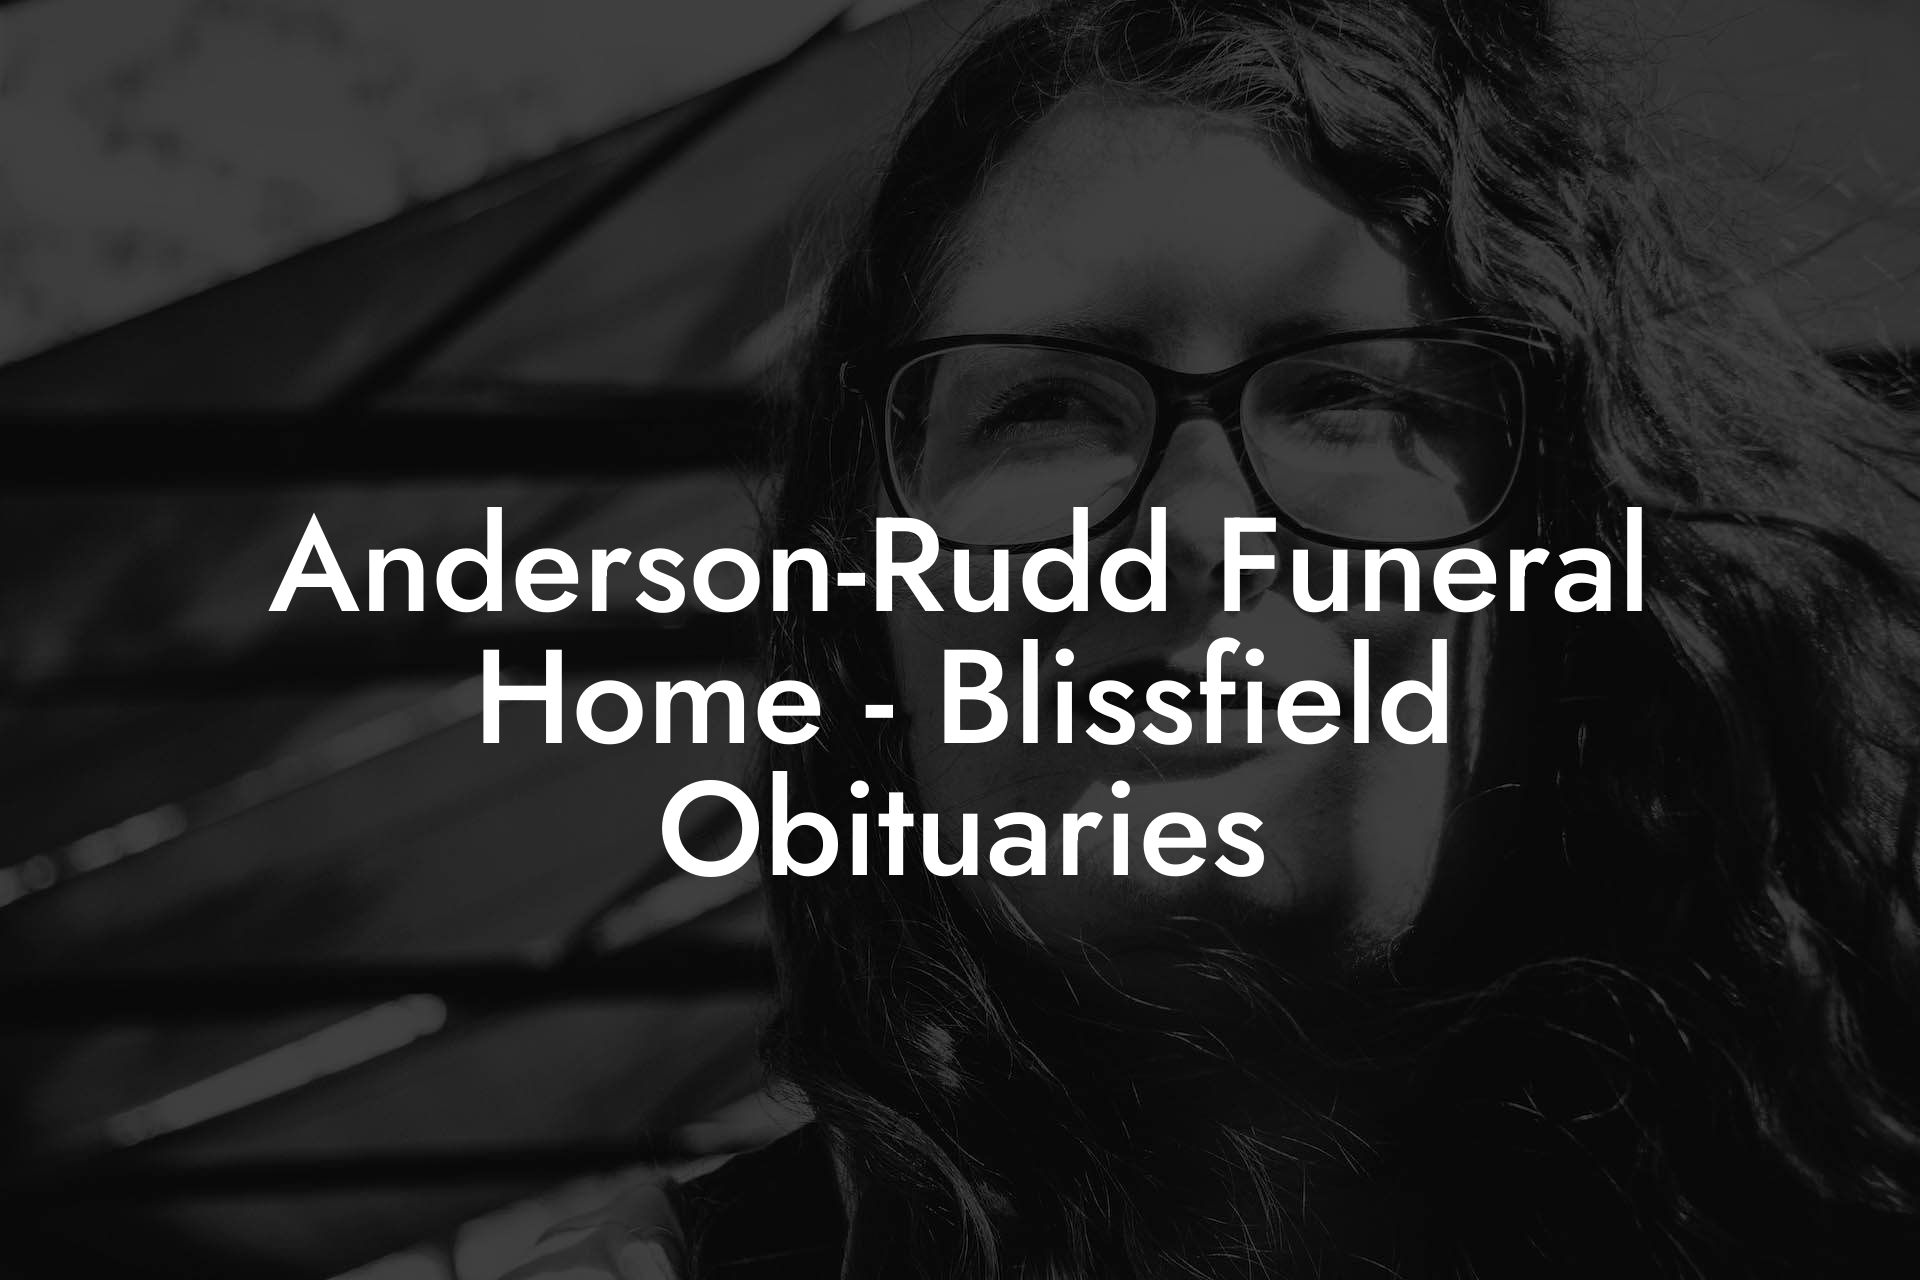 Anderson-Rudd Funeral Home - Blissfield Obituaries